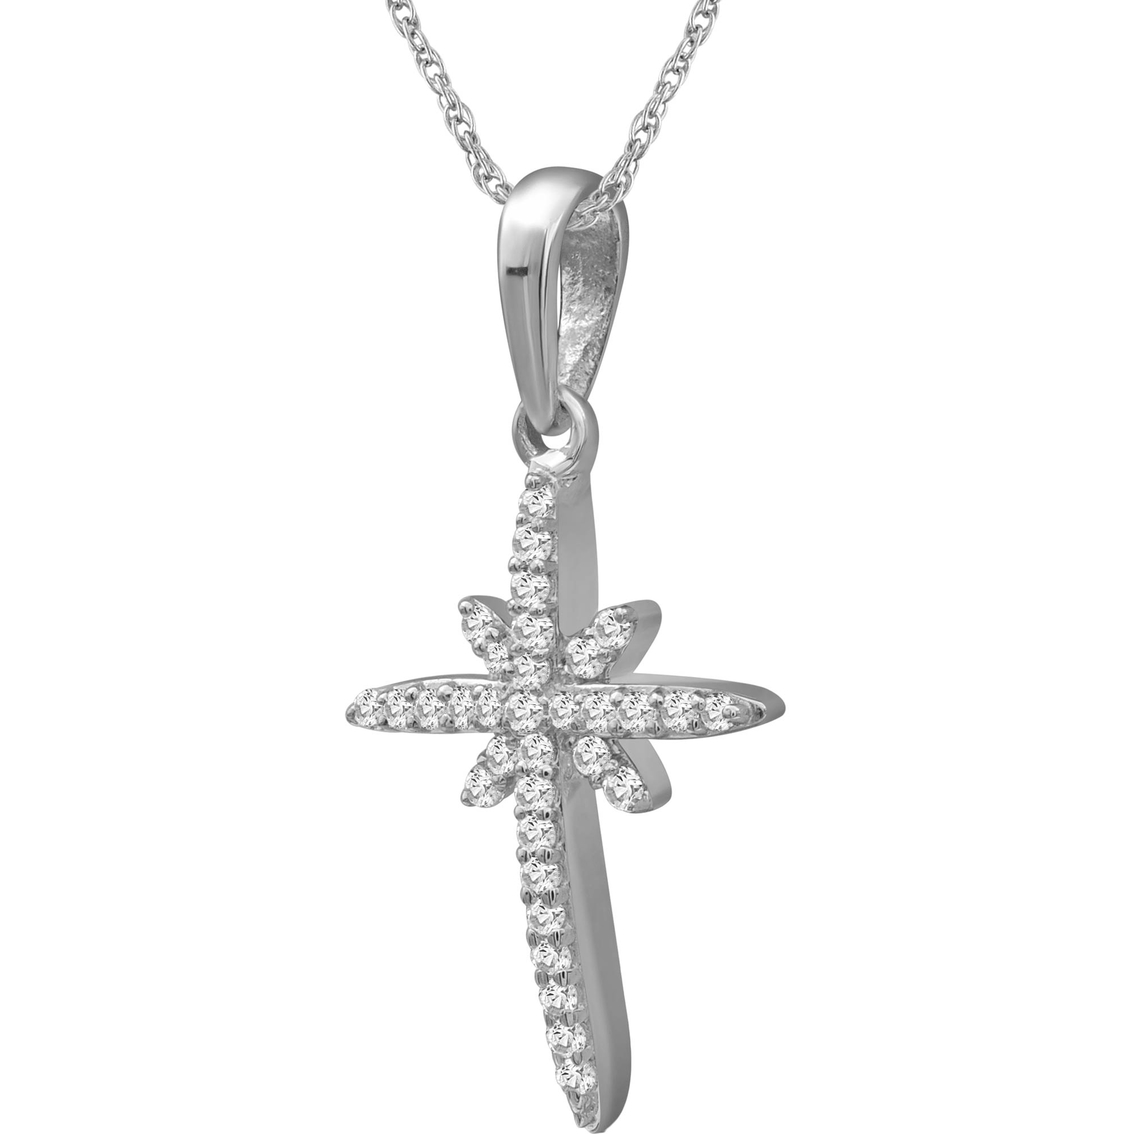 She Shines Sterling Silver 1/4 CTW Diamond Earring and Pendant Set - Image 2 of 7